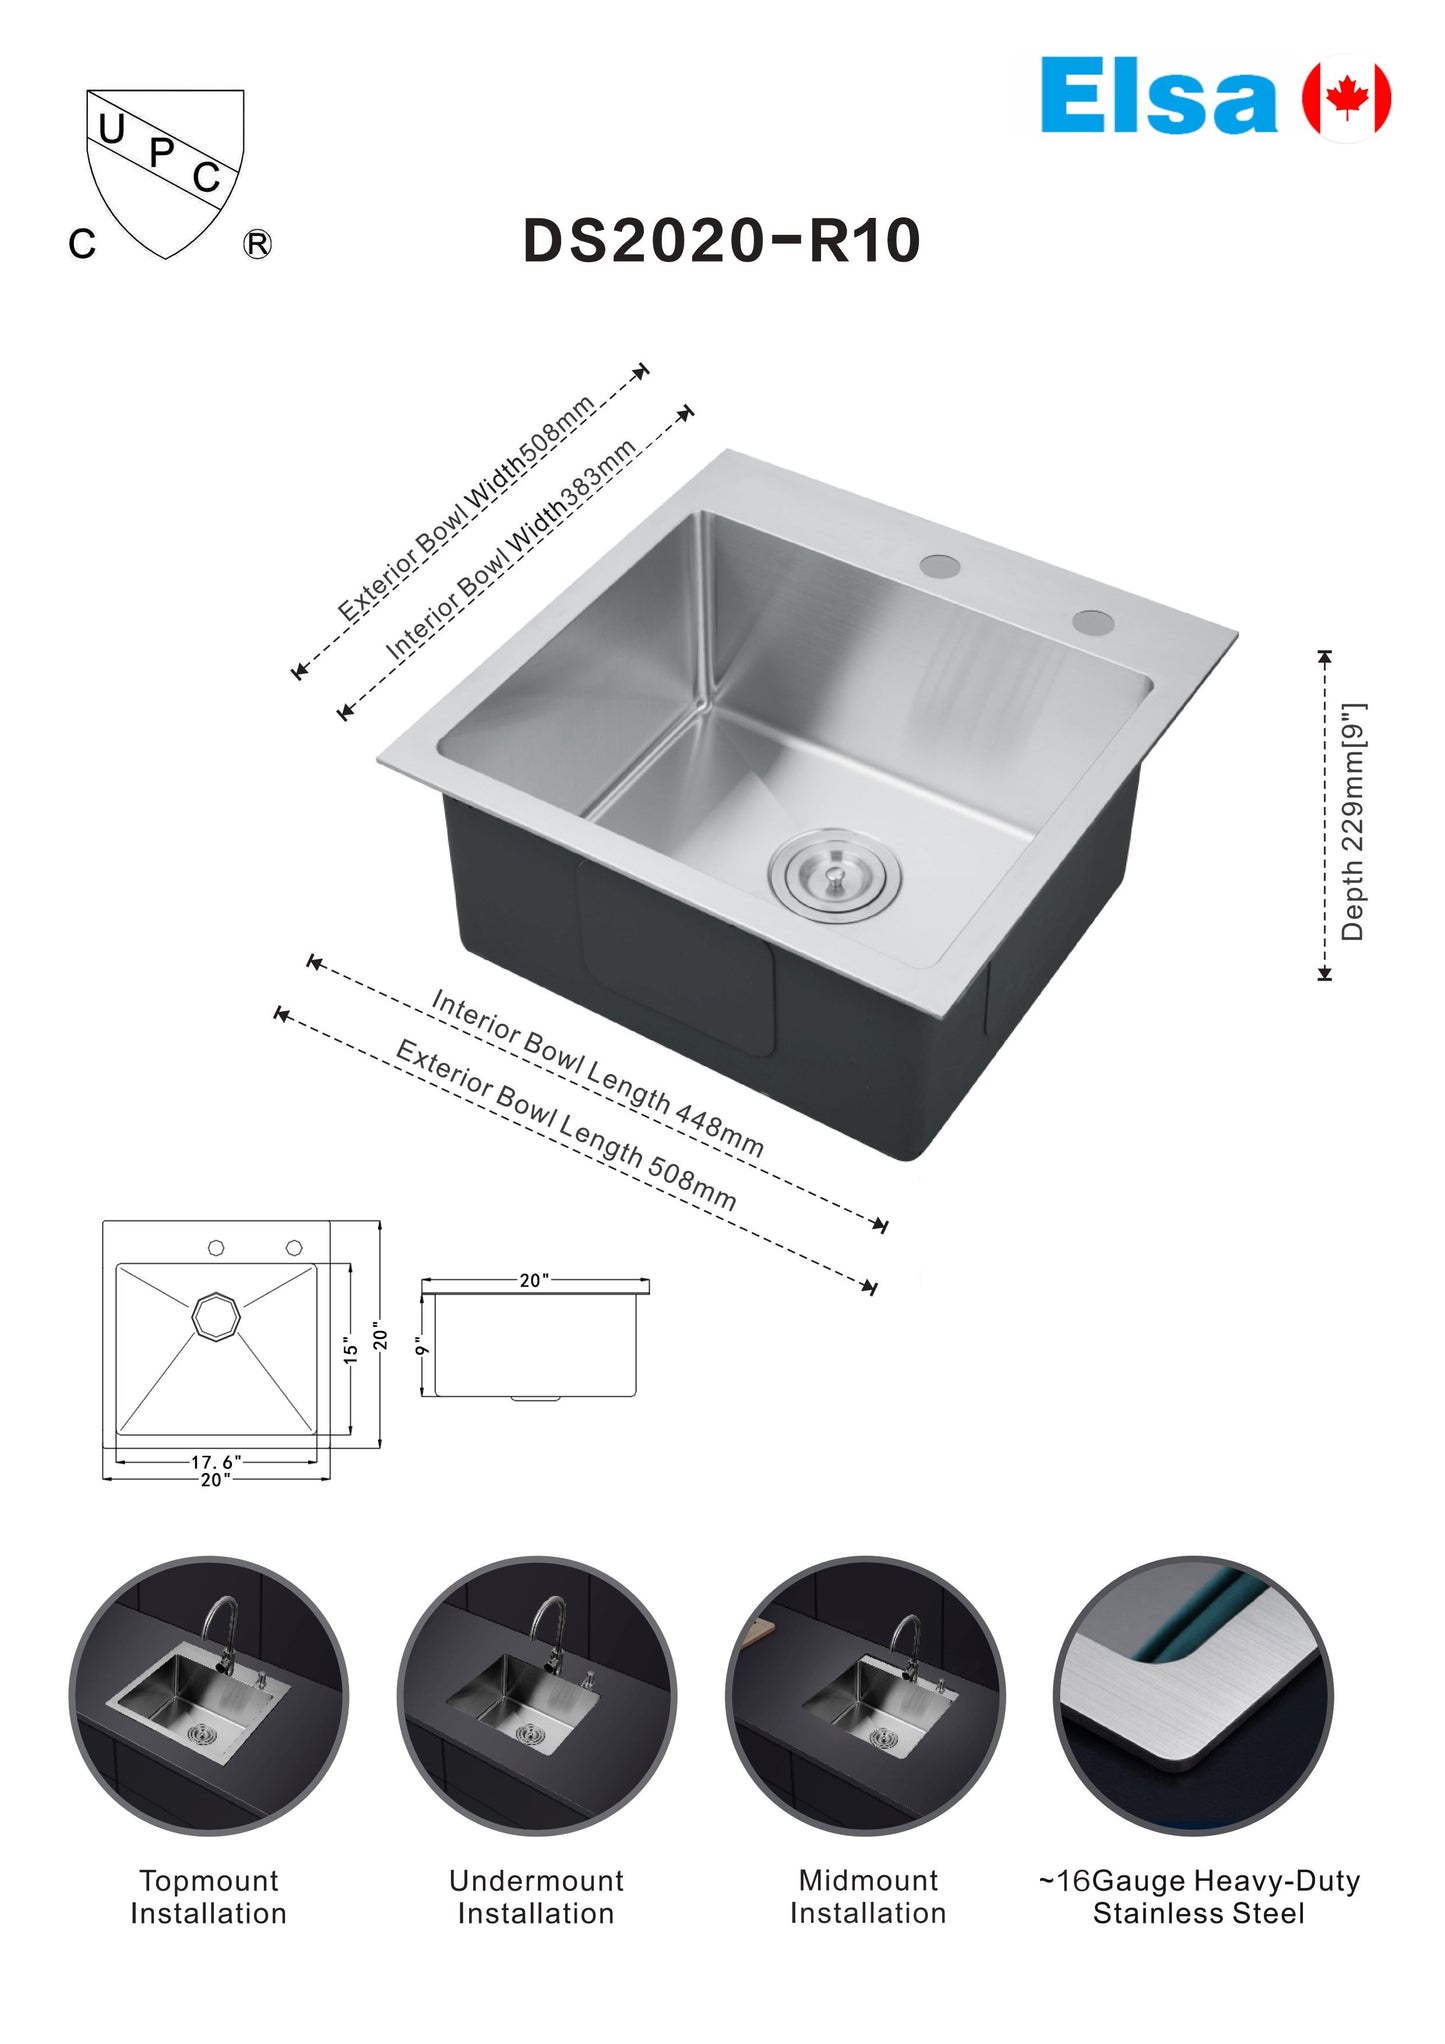 *PROMOTION* handmade kitchen sink DS2020-R10 topmount single bowl 16 gauged (drains not included)508x508x228mm (20"x20"x9") inside 17-5/8"x15-1/8"x9"  $99/PC